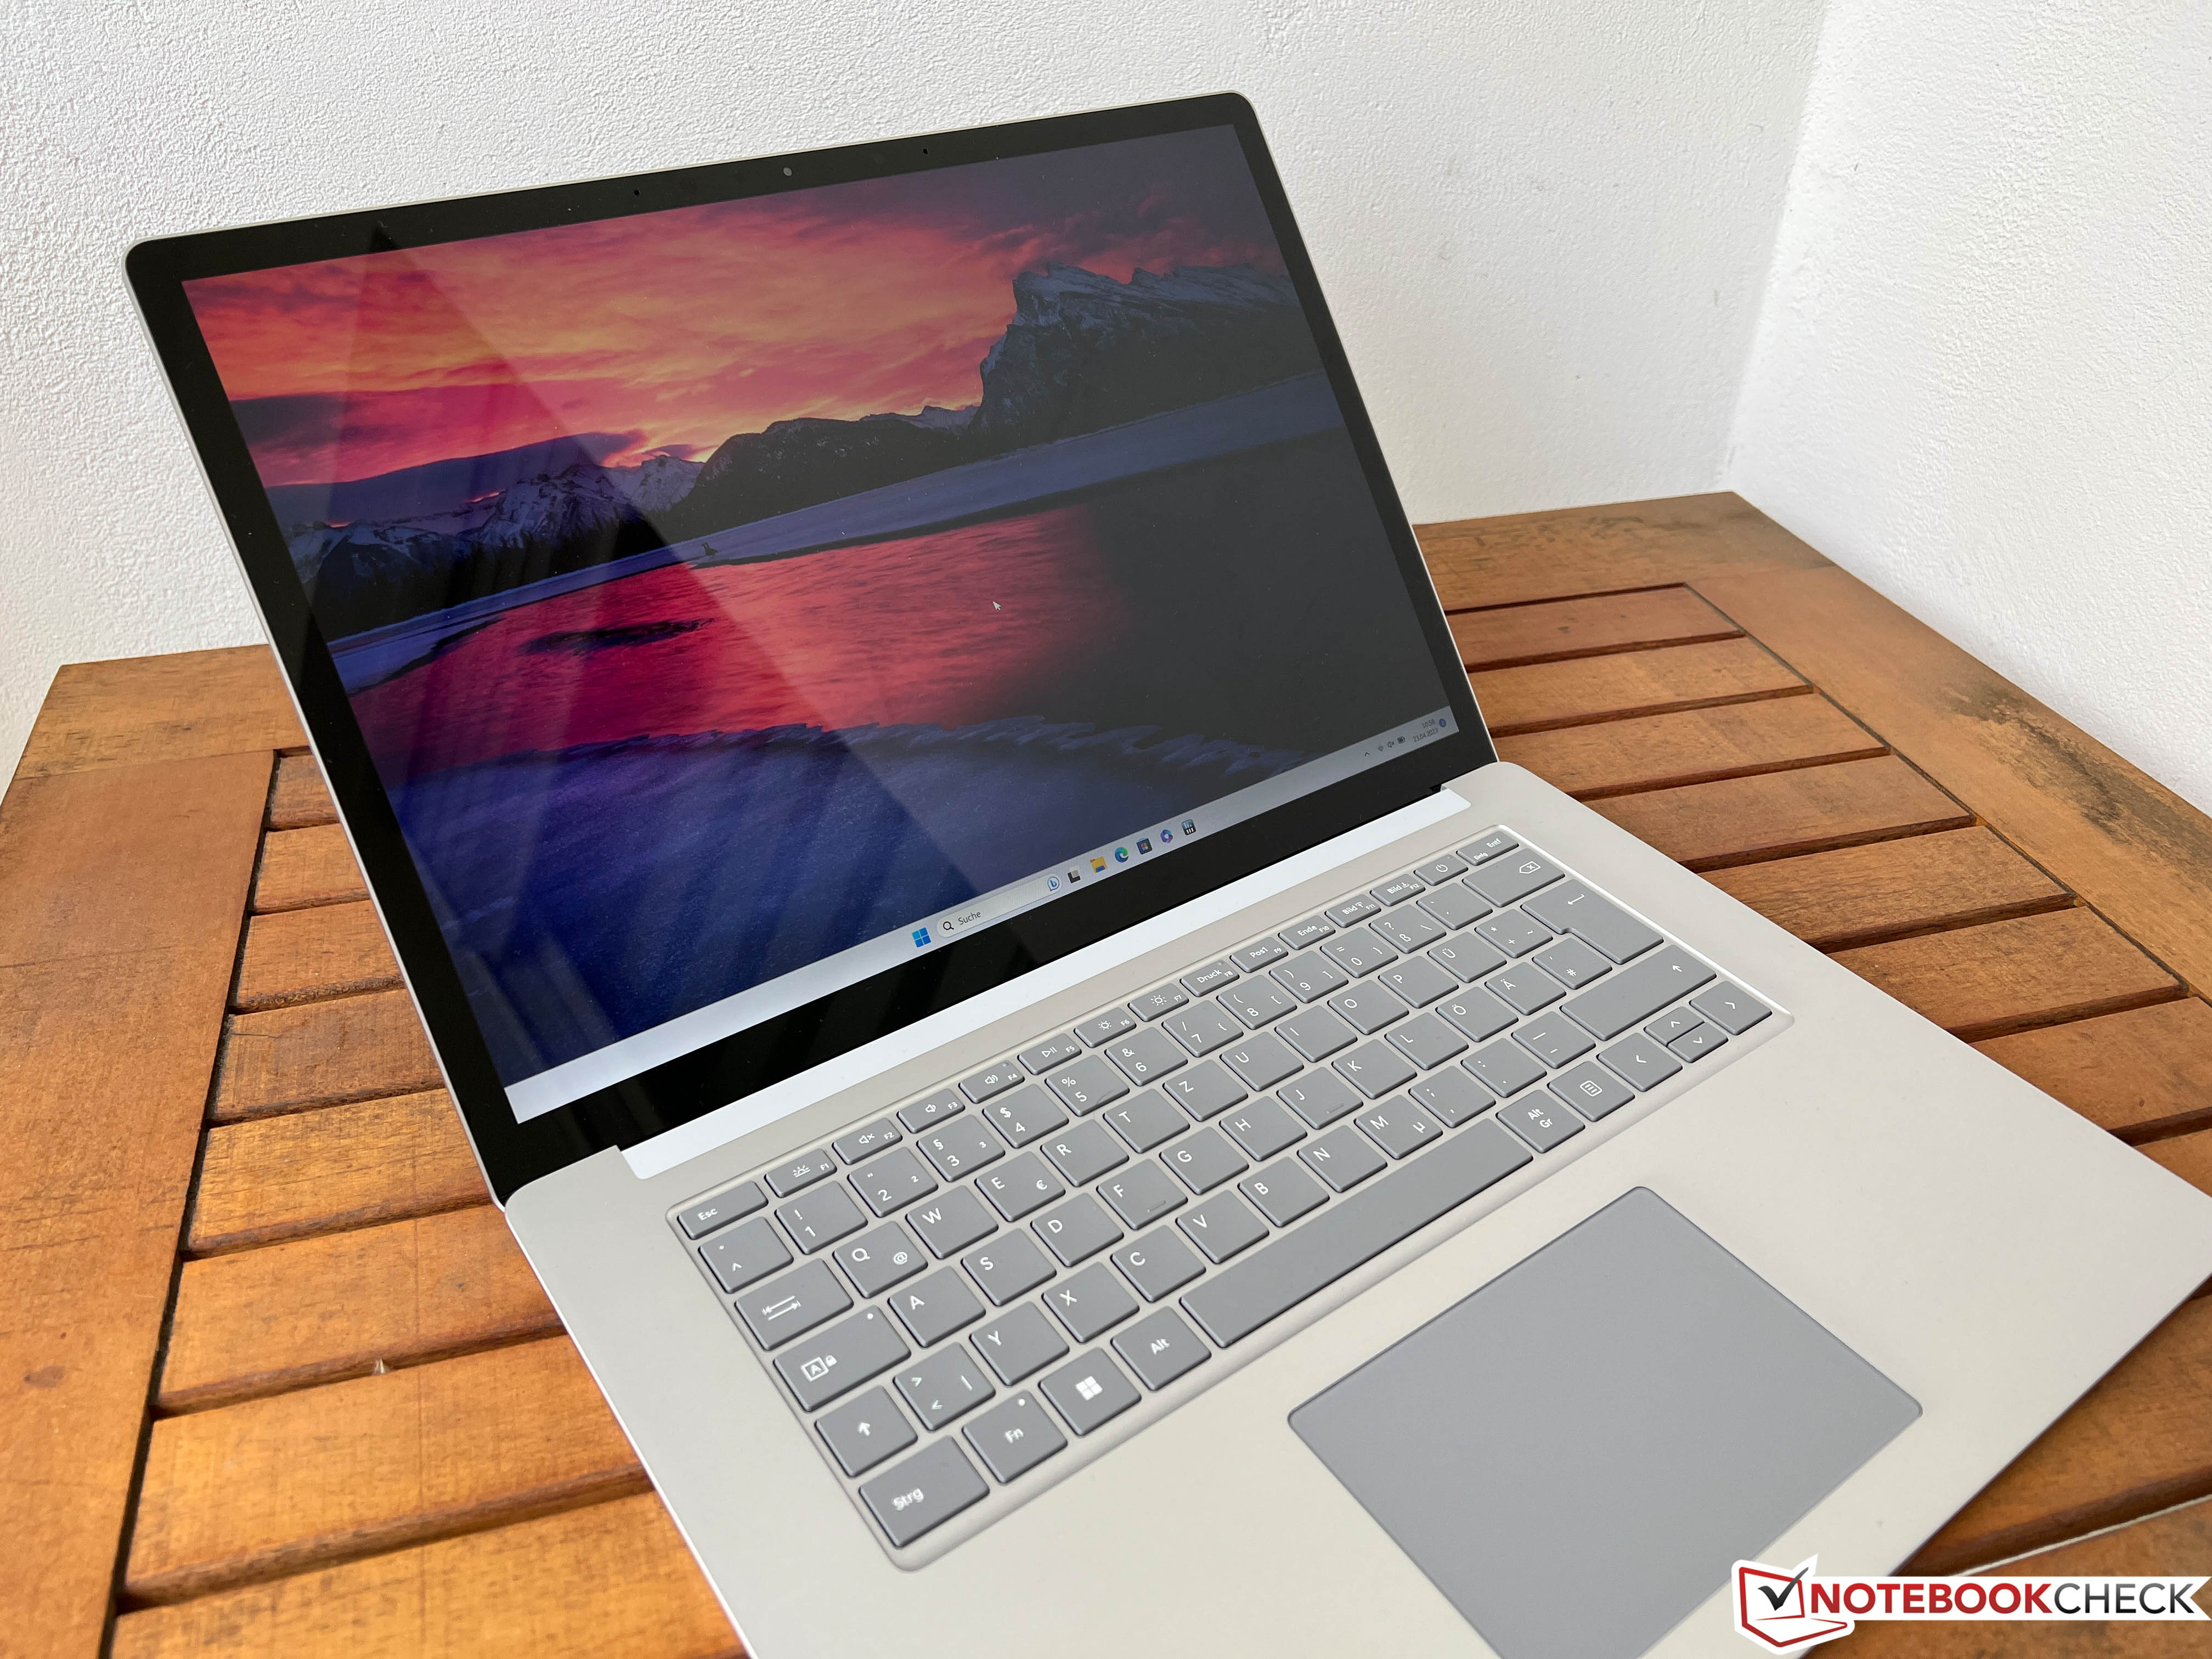 Microsoft Surface Laptop 4 (13.5) - Specs, Tests, and Prices